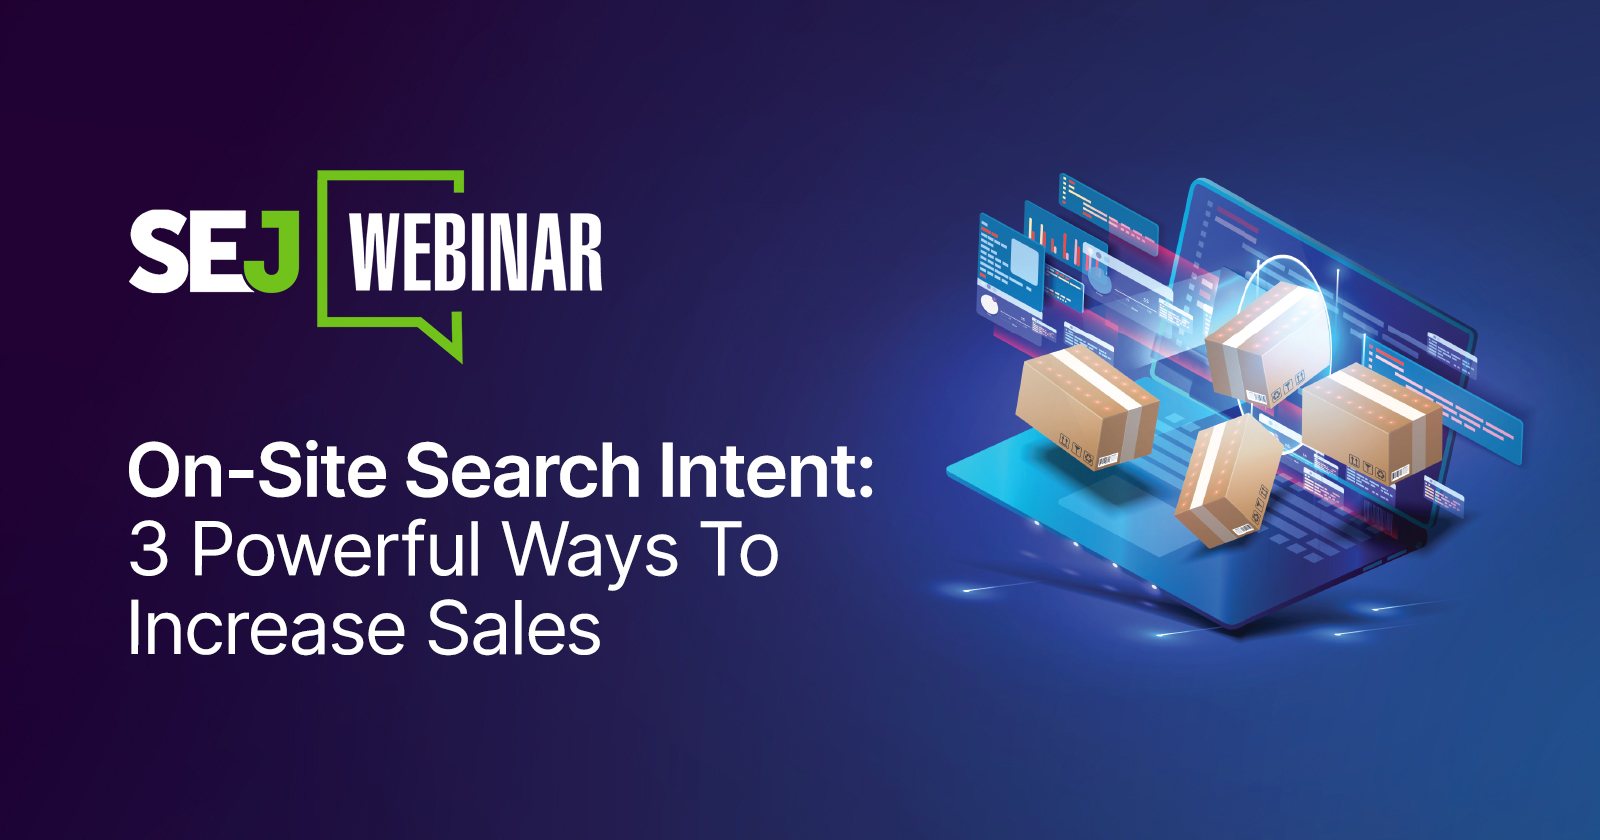 On-Site Search Intent: 3 Powerful Ways To Increase Sales [Webinar] via @sejournal, @hethr_campbell